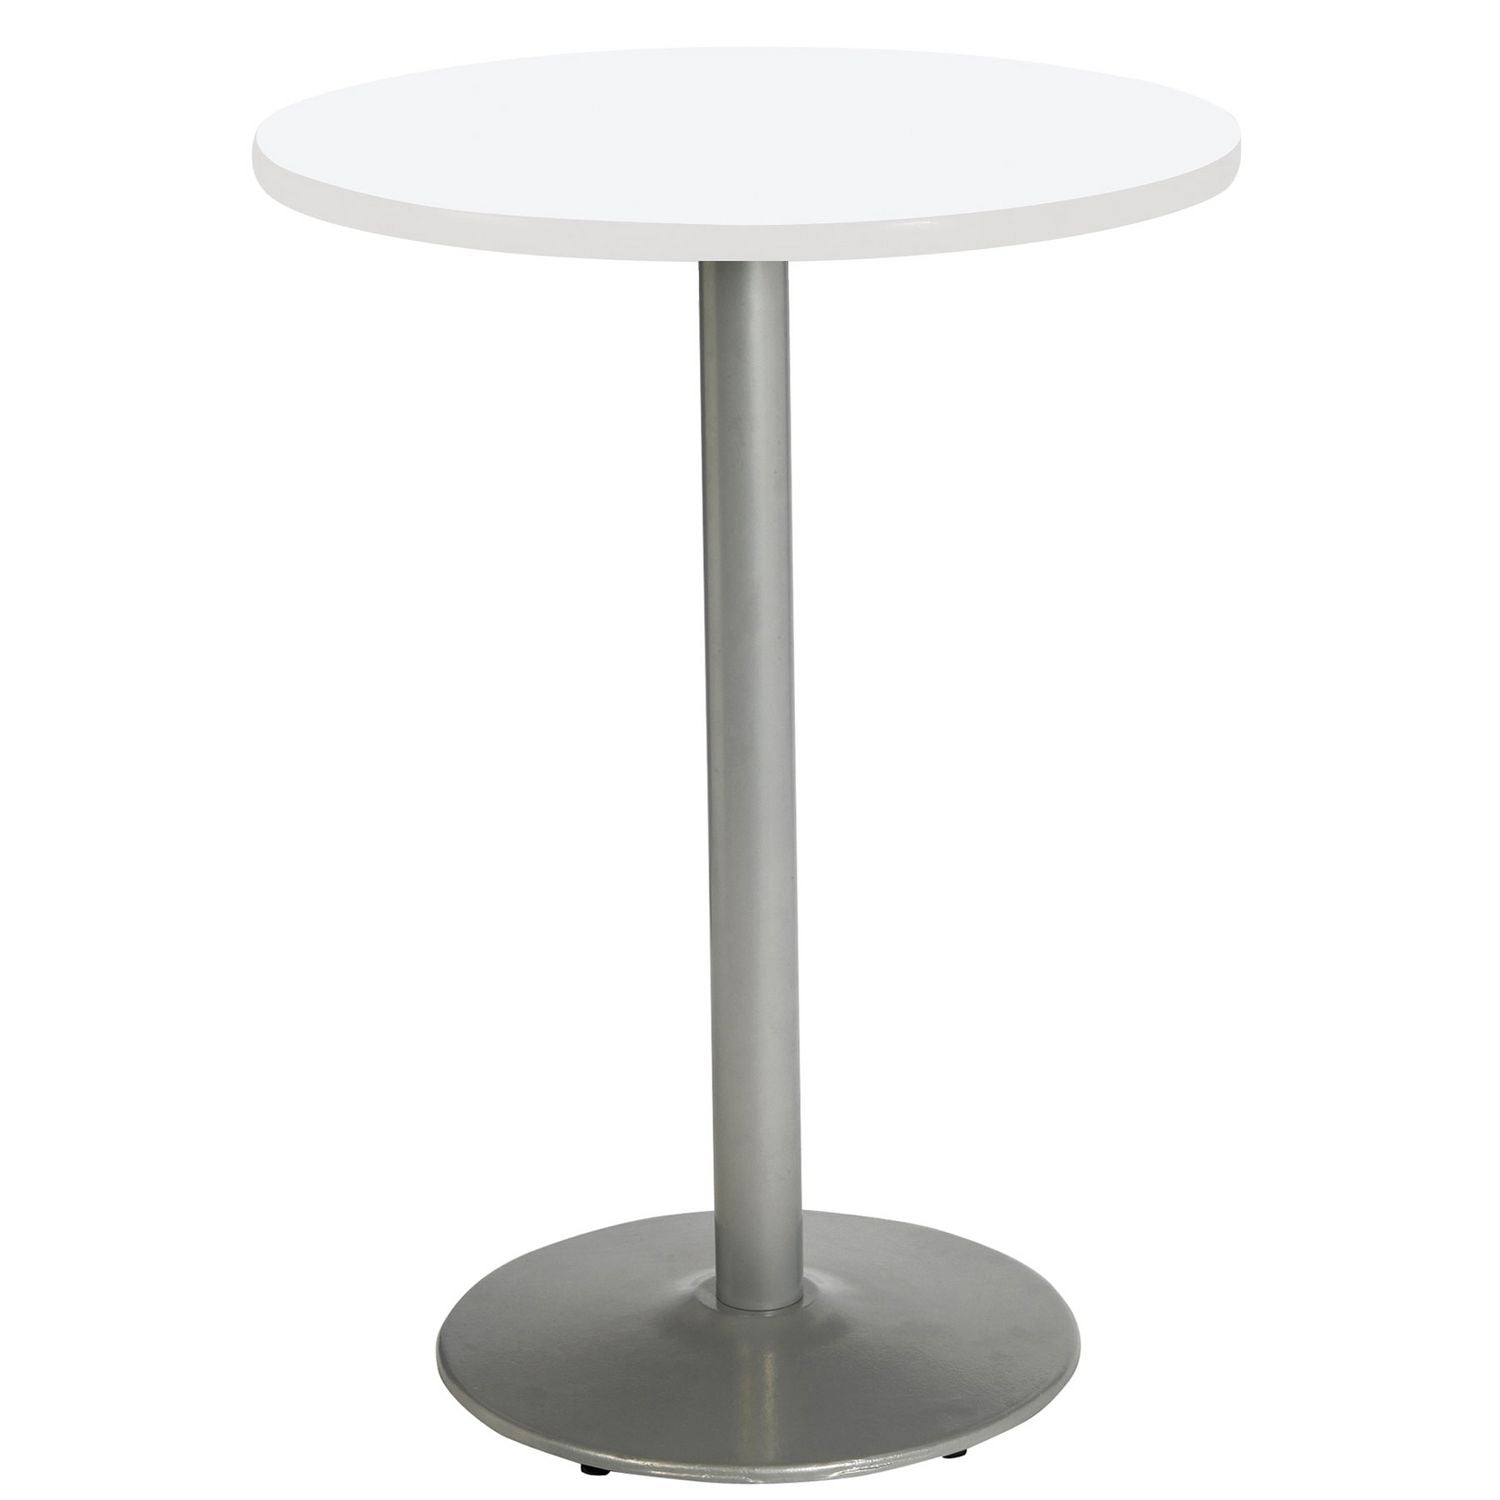 pedestal-bistro-table-with-four-lime-green-kool-series-barstools-round-36-dia-x-41h-designer-white-ships-in-4-6-bus-days_kfi811774037112 - 2